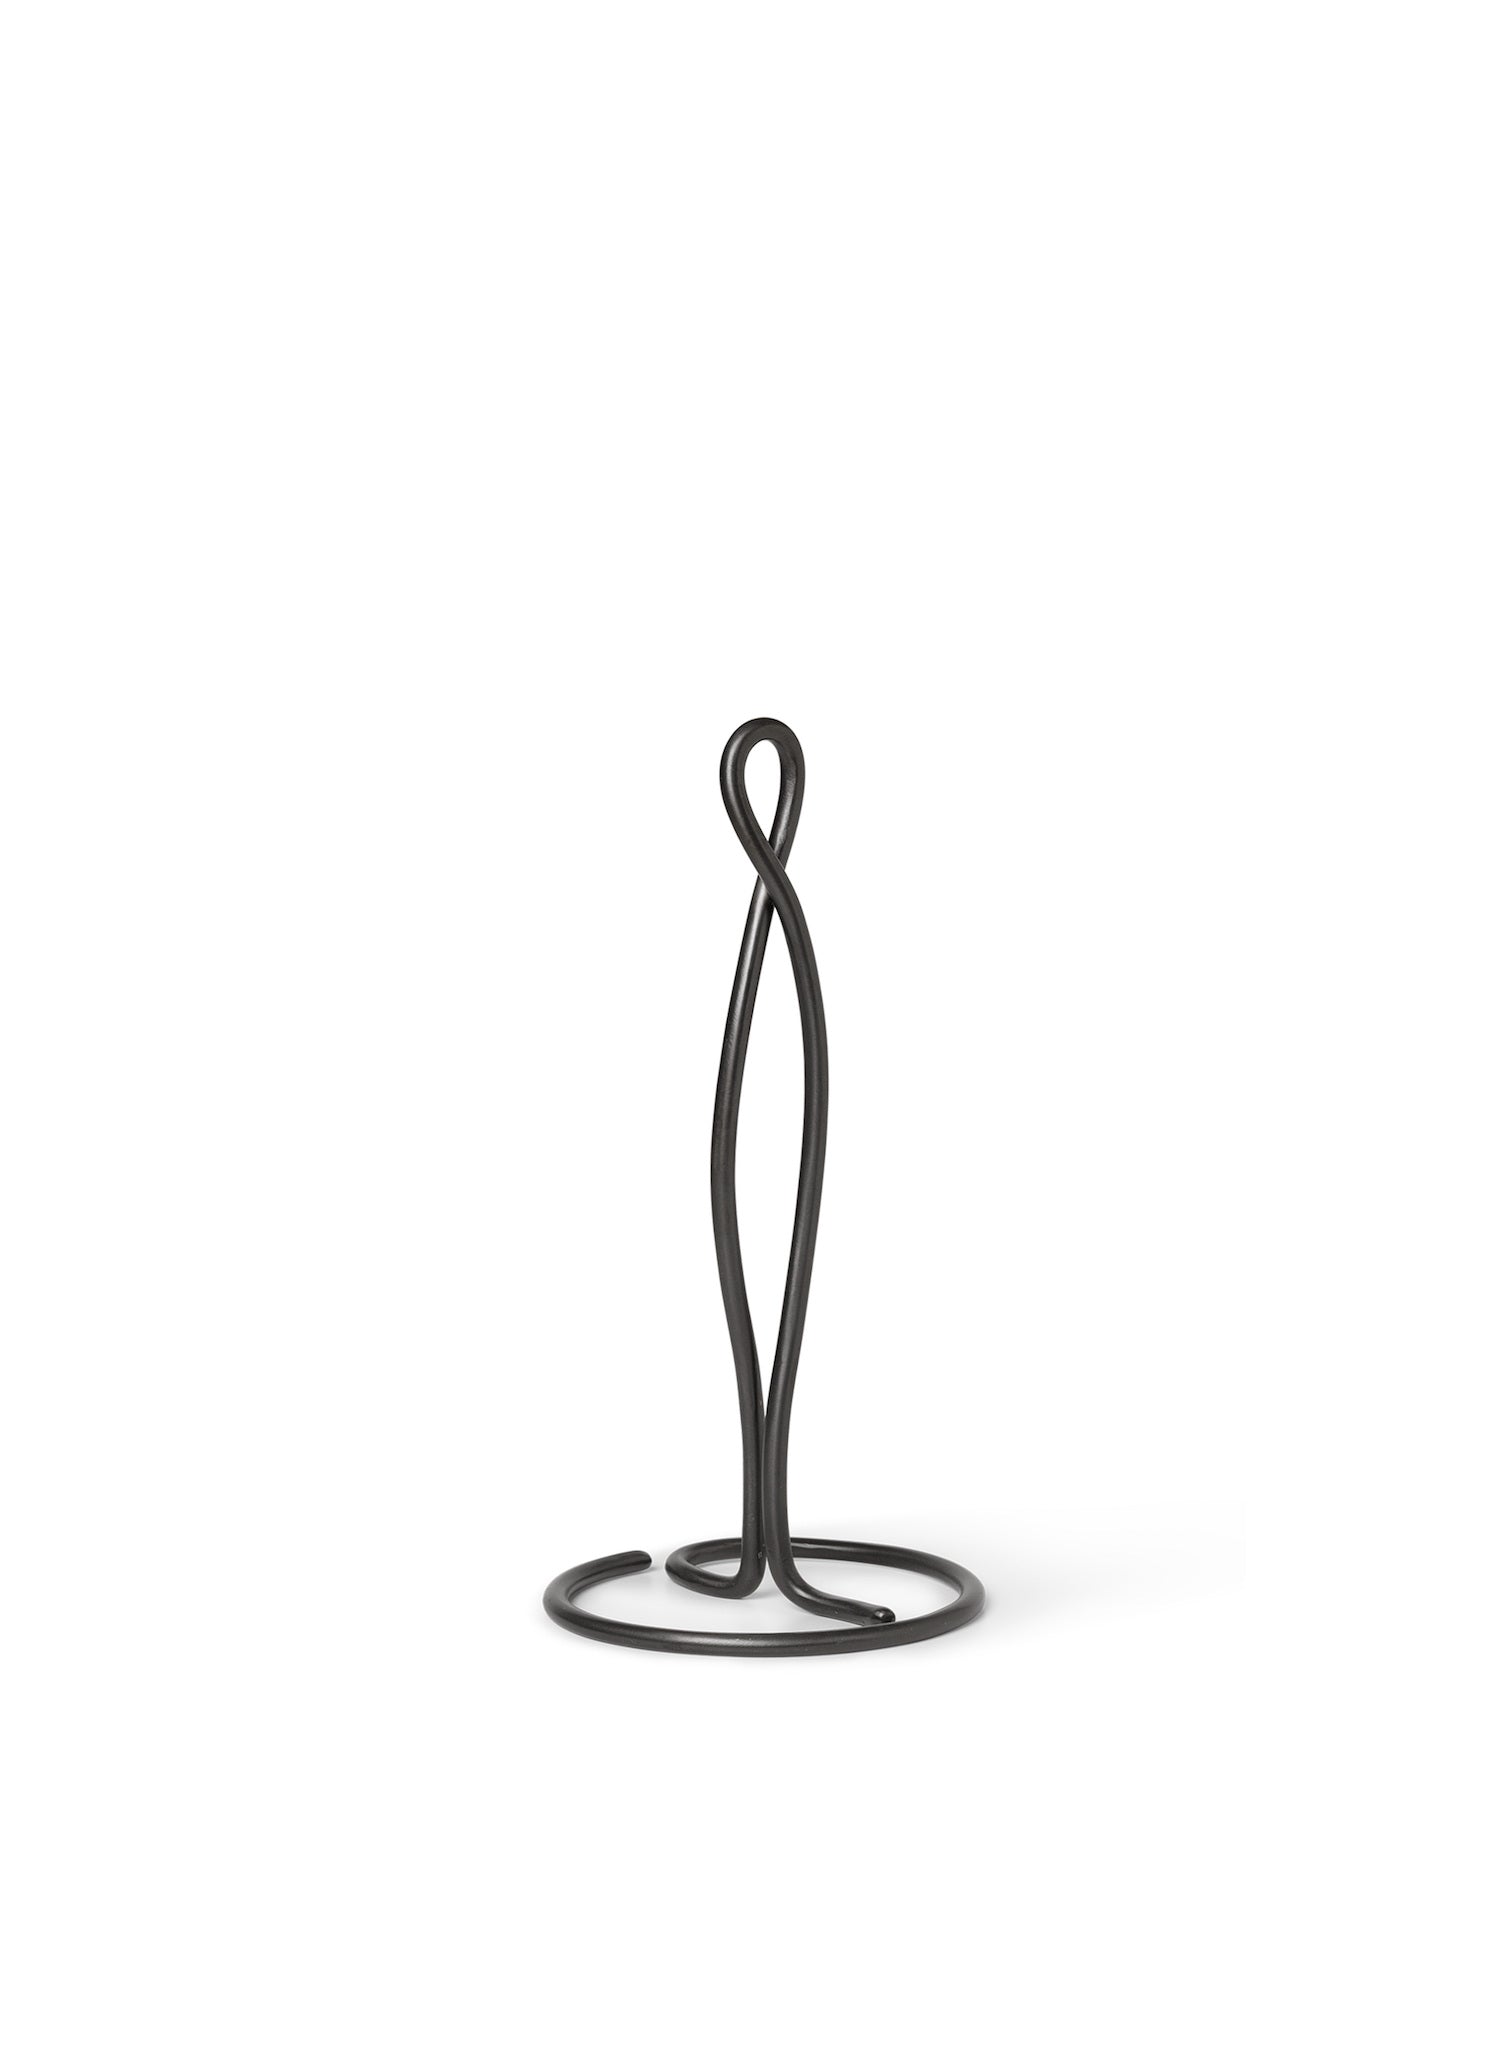 Organically shaped kitchen accessory hand formed in solid brass with a matte black patina finish. 